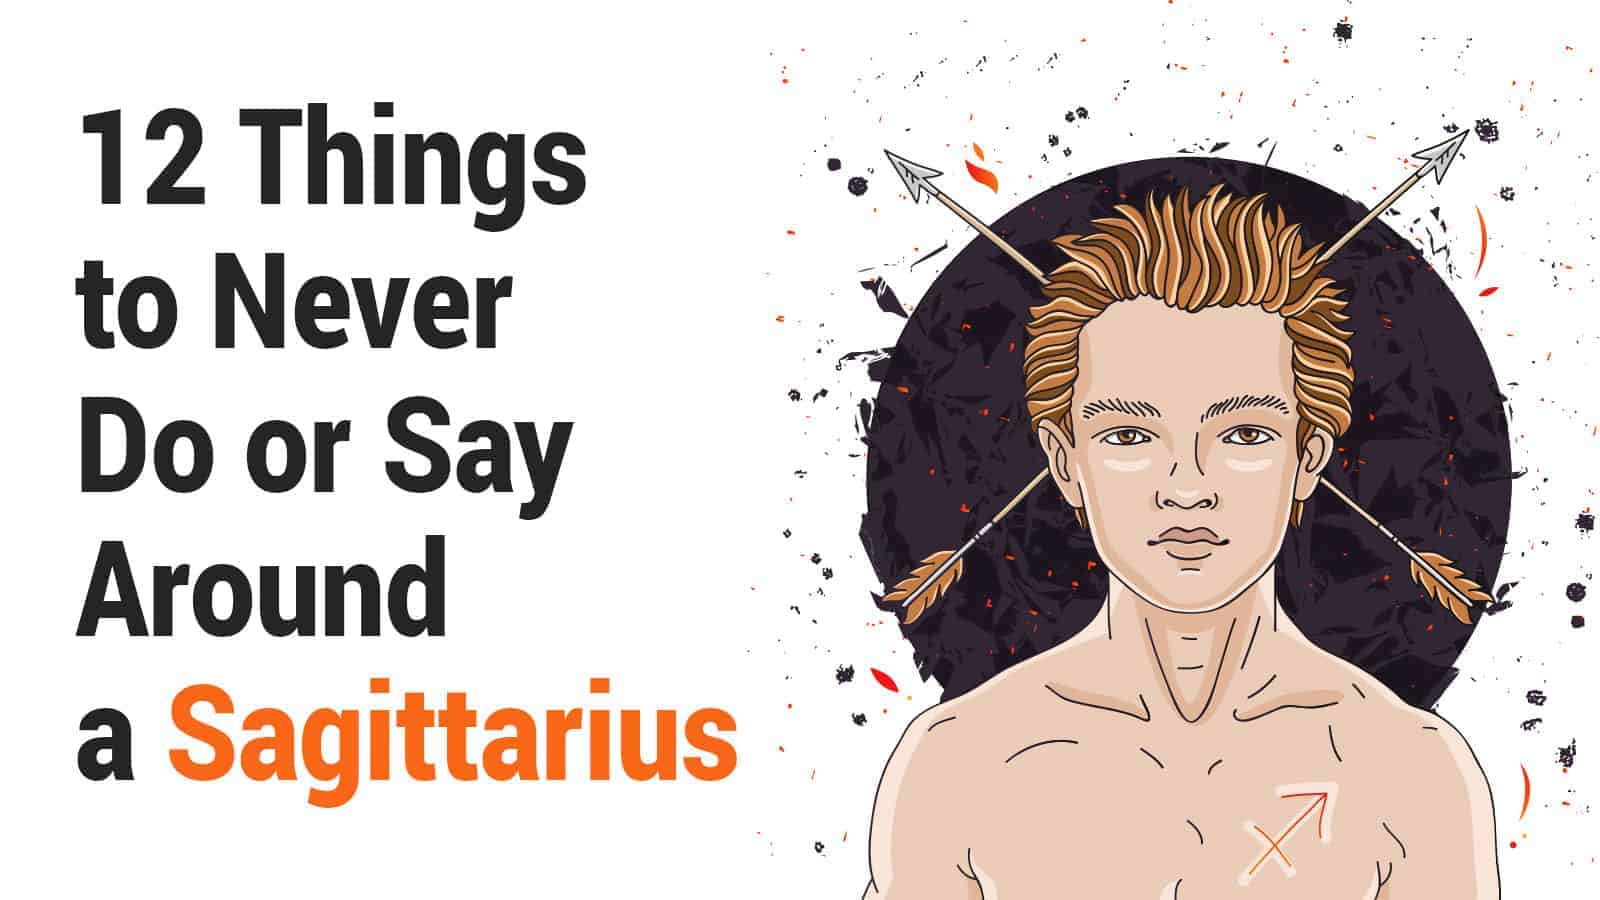 12 Things to Never Do or Say Around a Sagittarius